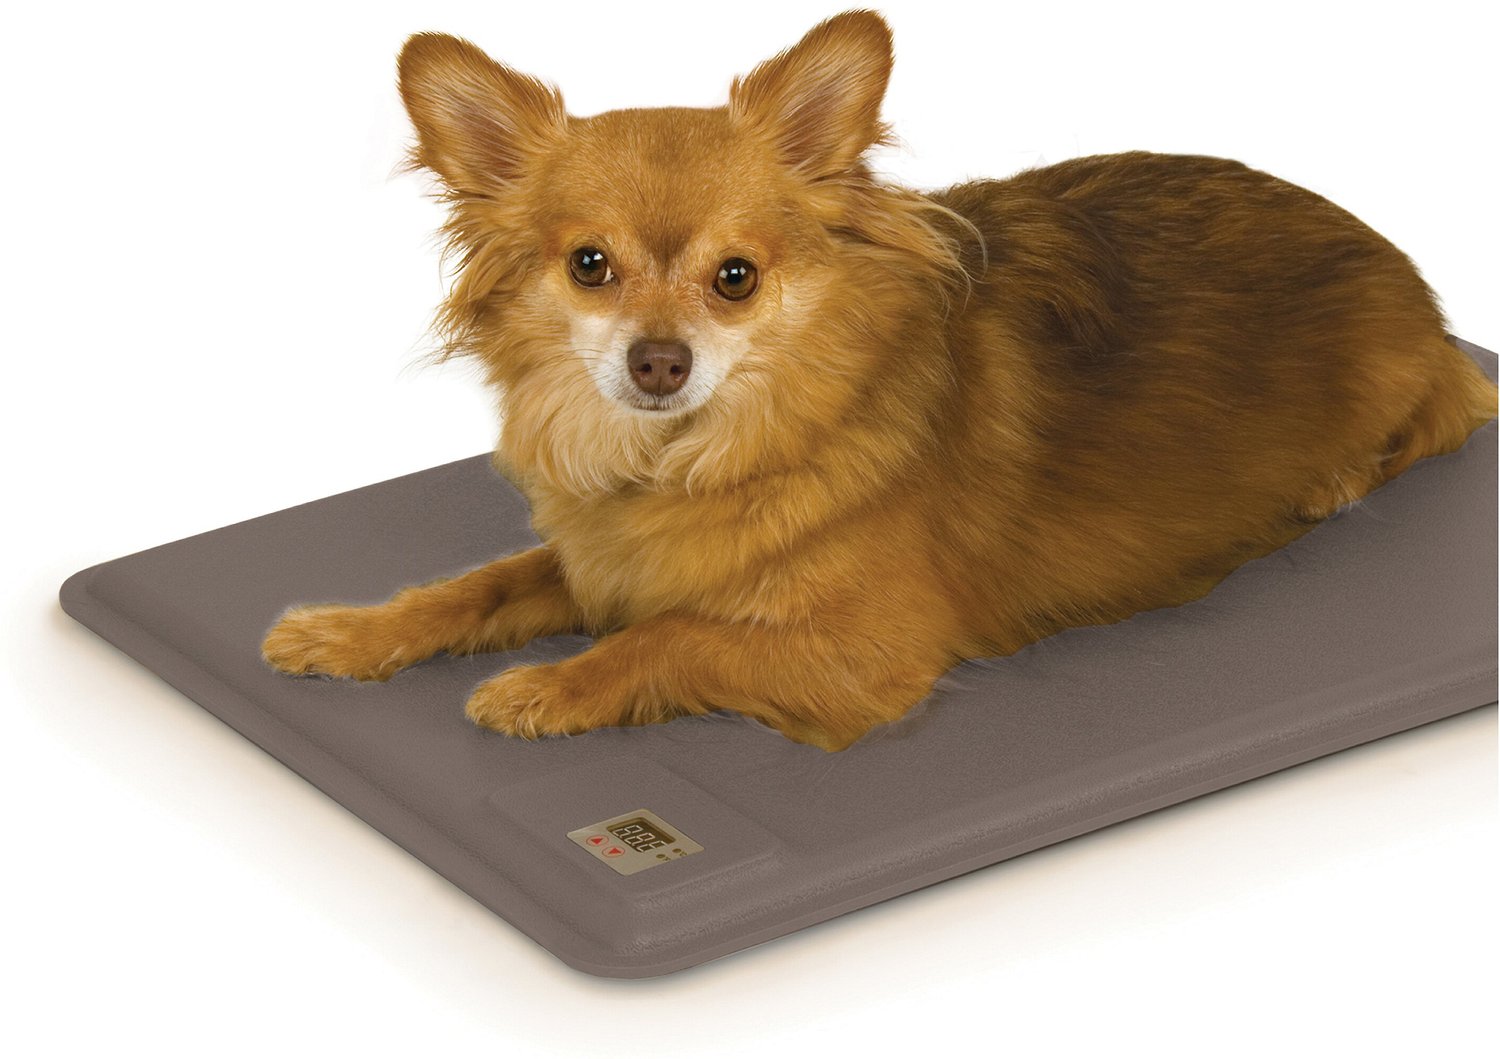 K&H PET PRODUCTS Deluxe Lectro-Kennel Heated Pad & Cover ...